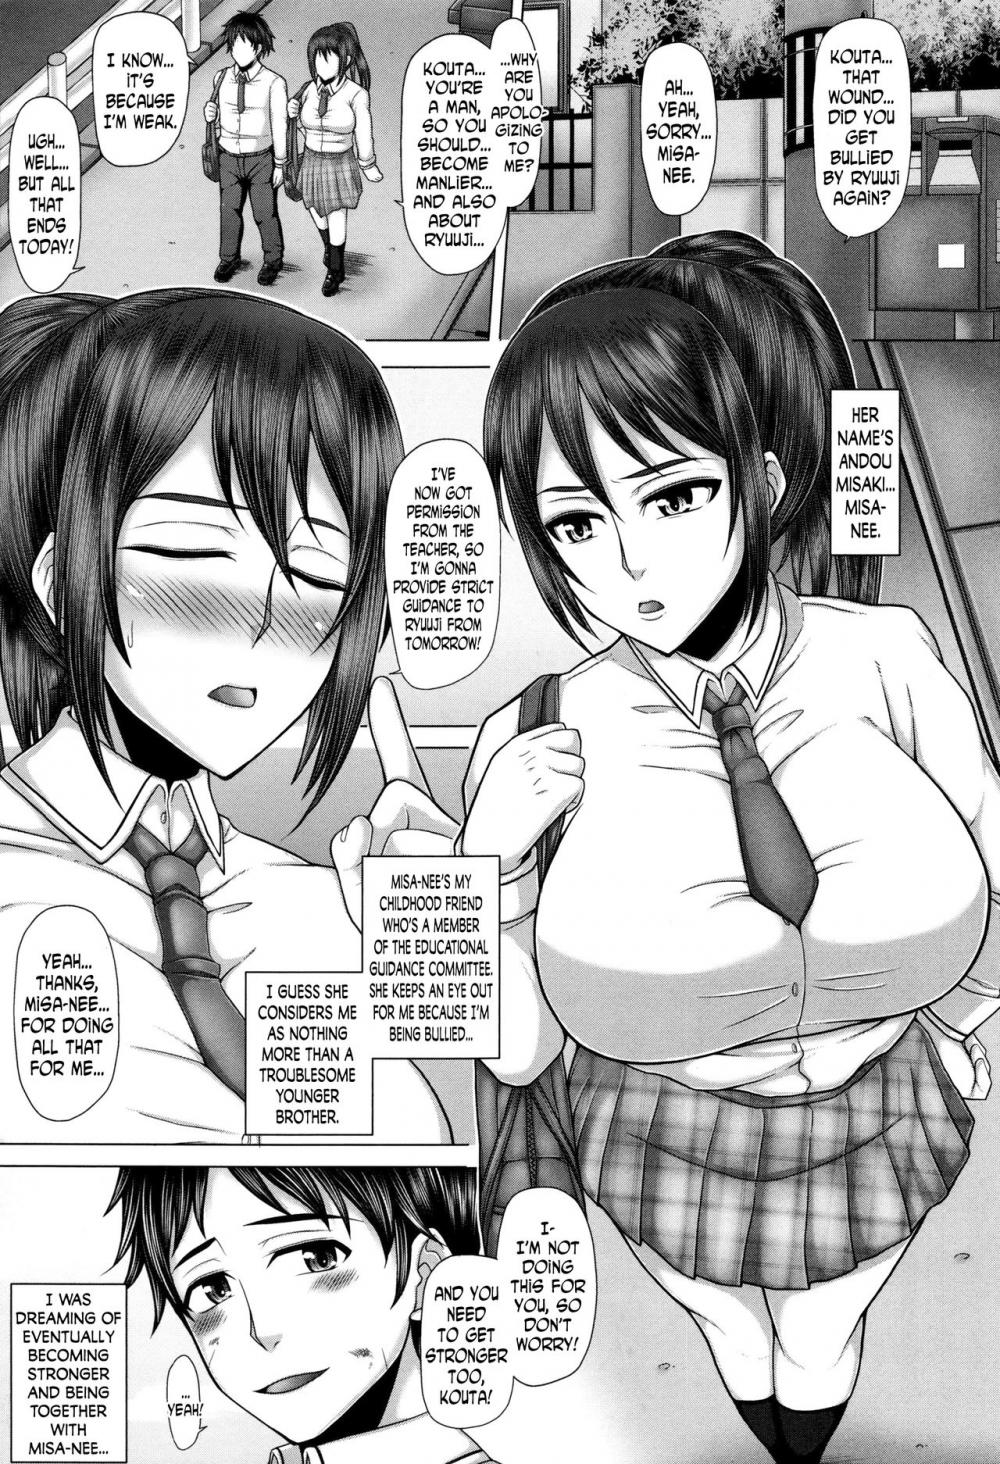 Hentai Black Bitch - Black GAL IMMORAL 24H Convenience Store Bitch!!-Chapter 1-Hentai Manga  Hentai Comic - Page: 6 - Online porn video at mobile